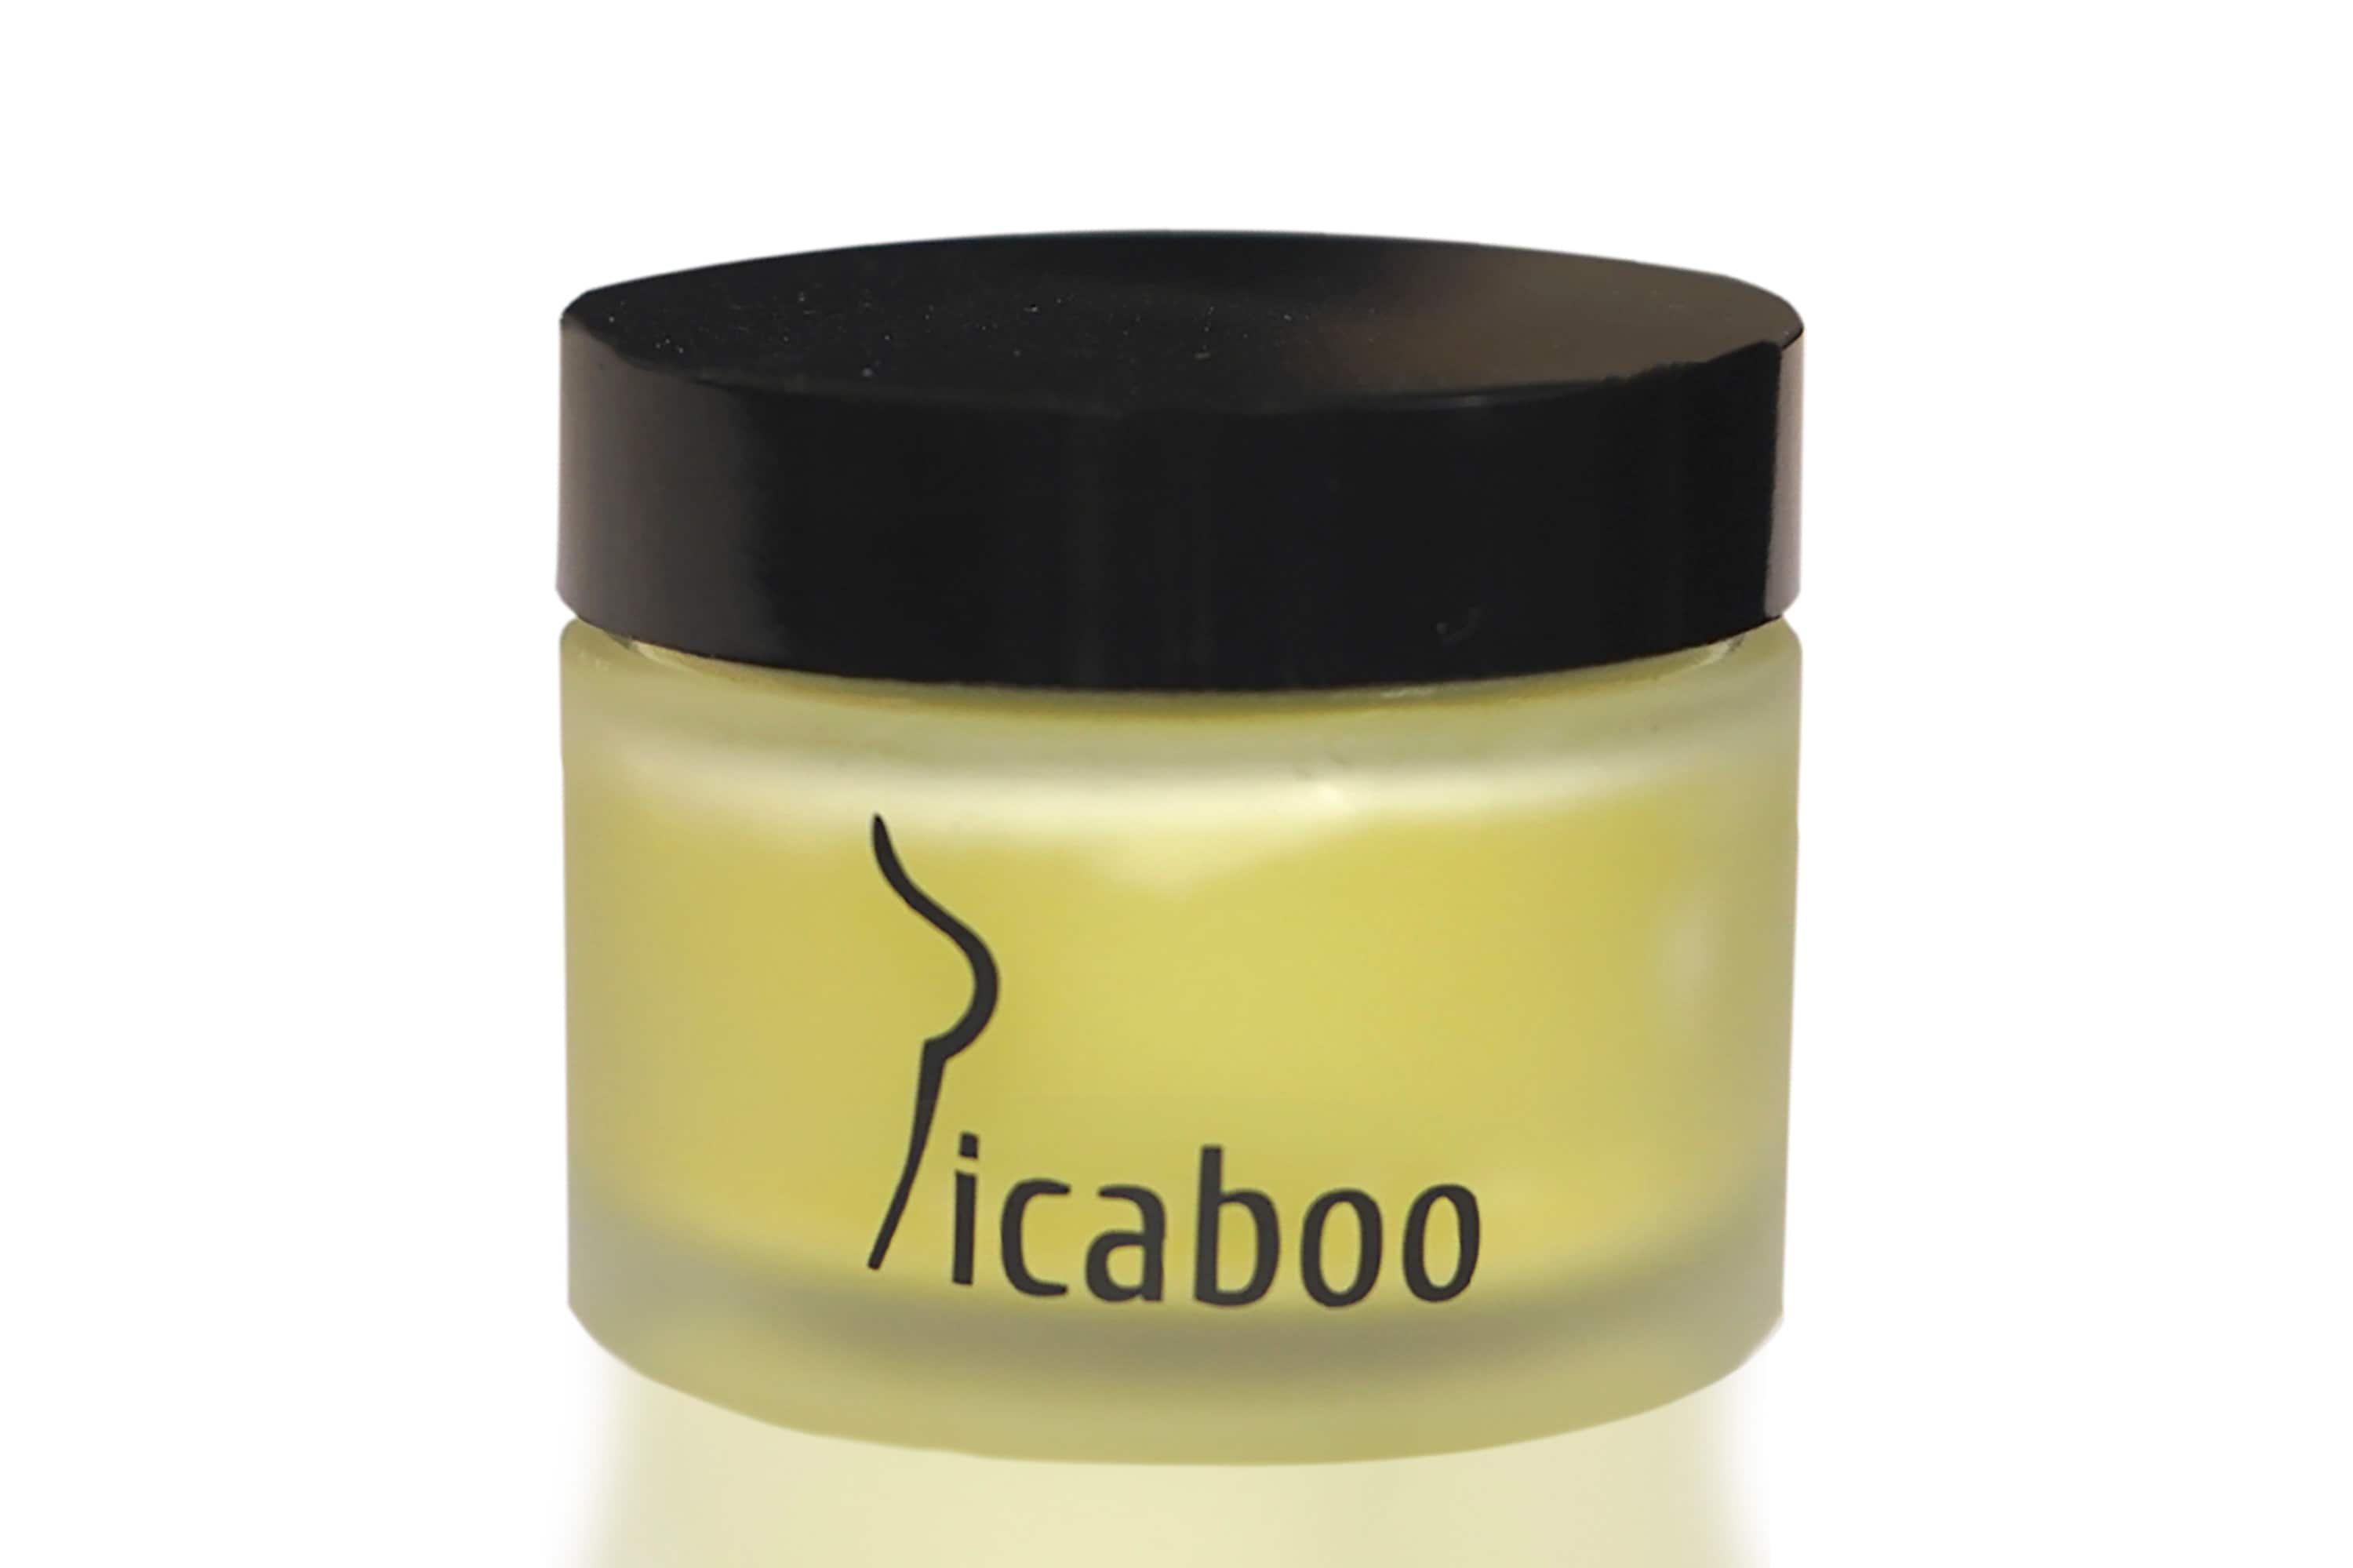 Wholesale Picaboo, Under Breast Rash Treatment Balm for your store - Faire